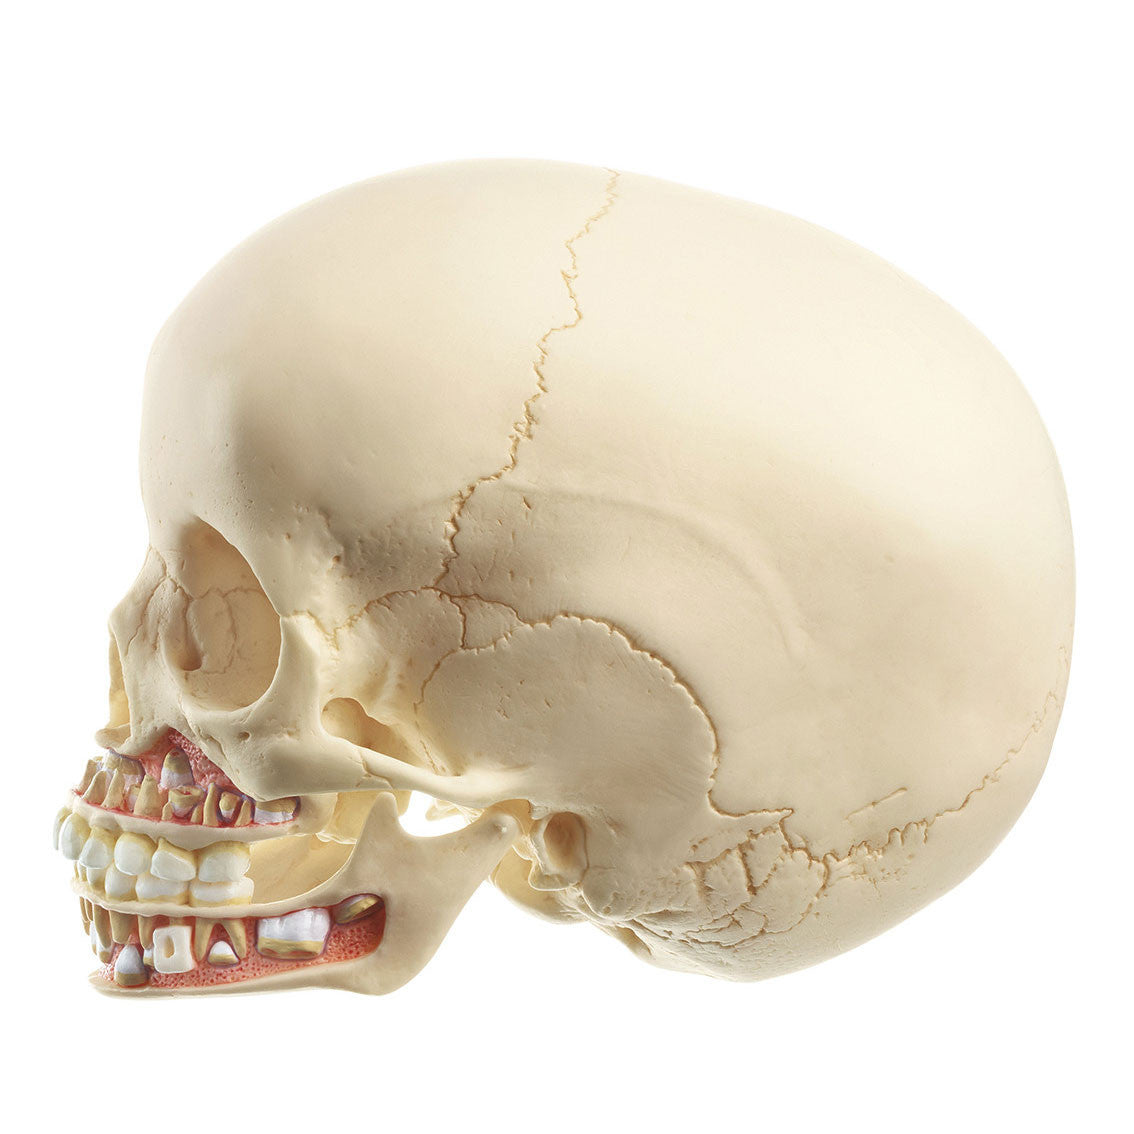 Artificial Skull of Child (Approx 6 Years Old) Somso Qs 3/2